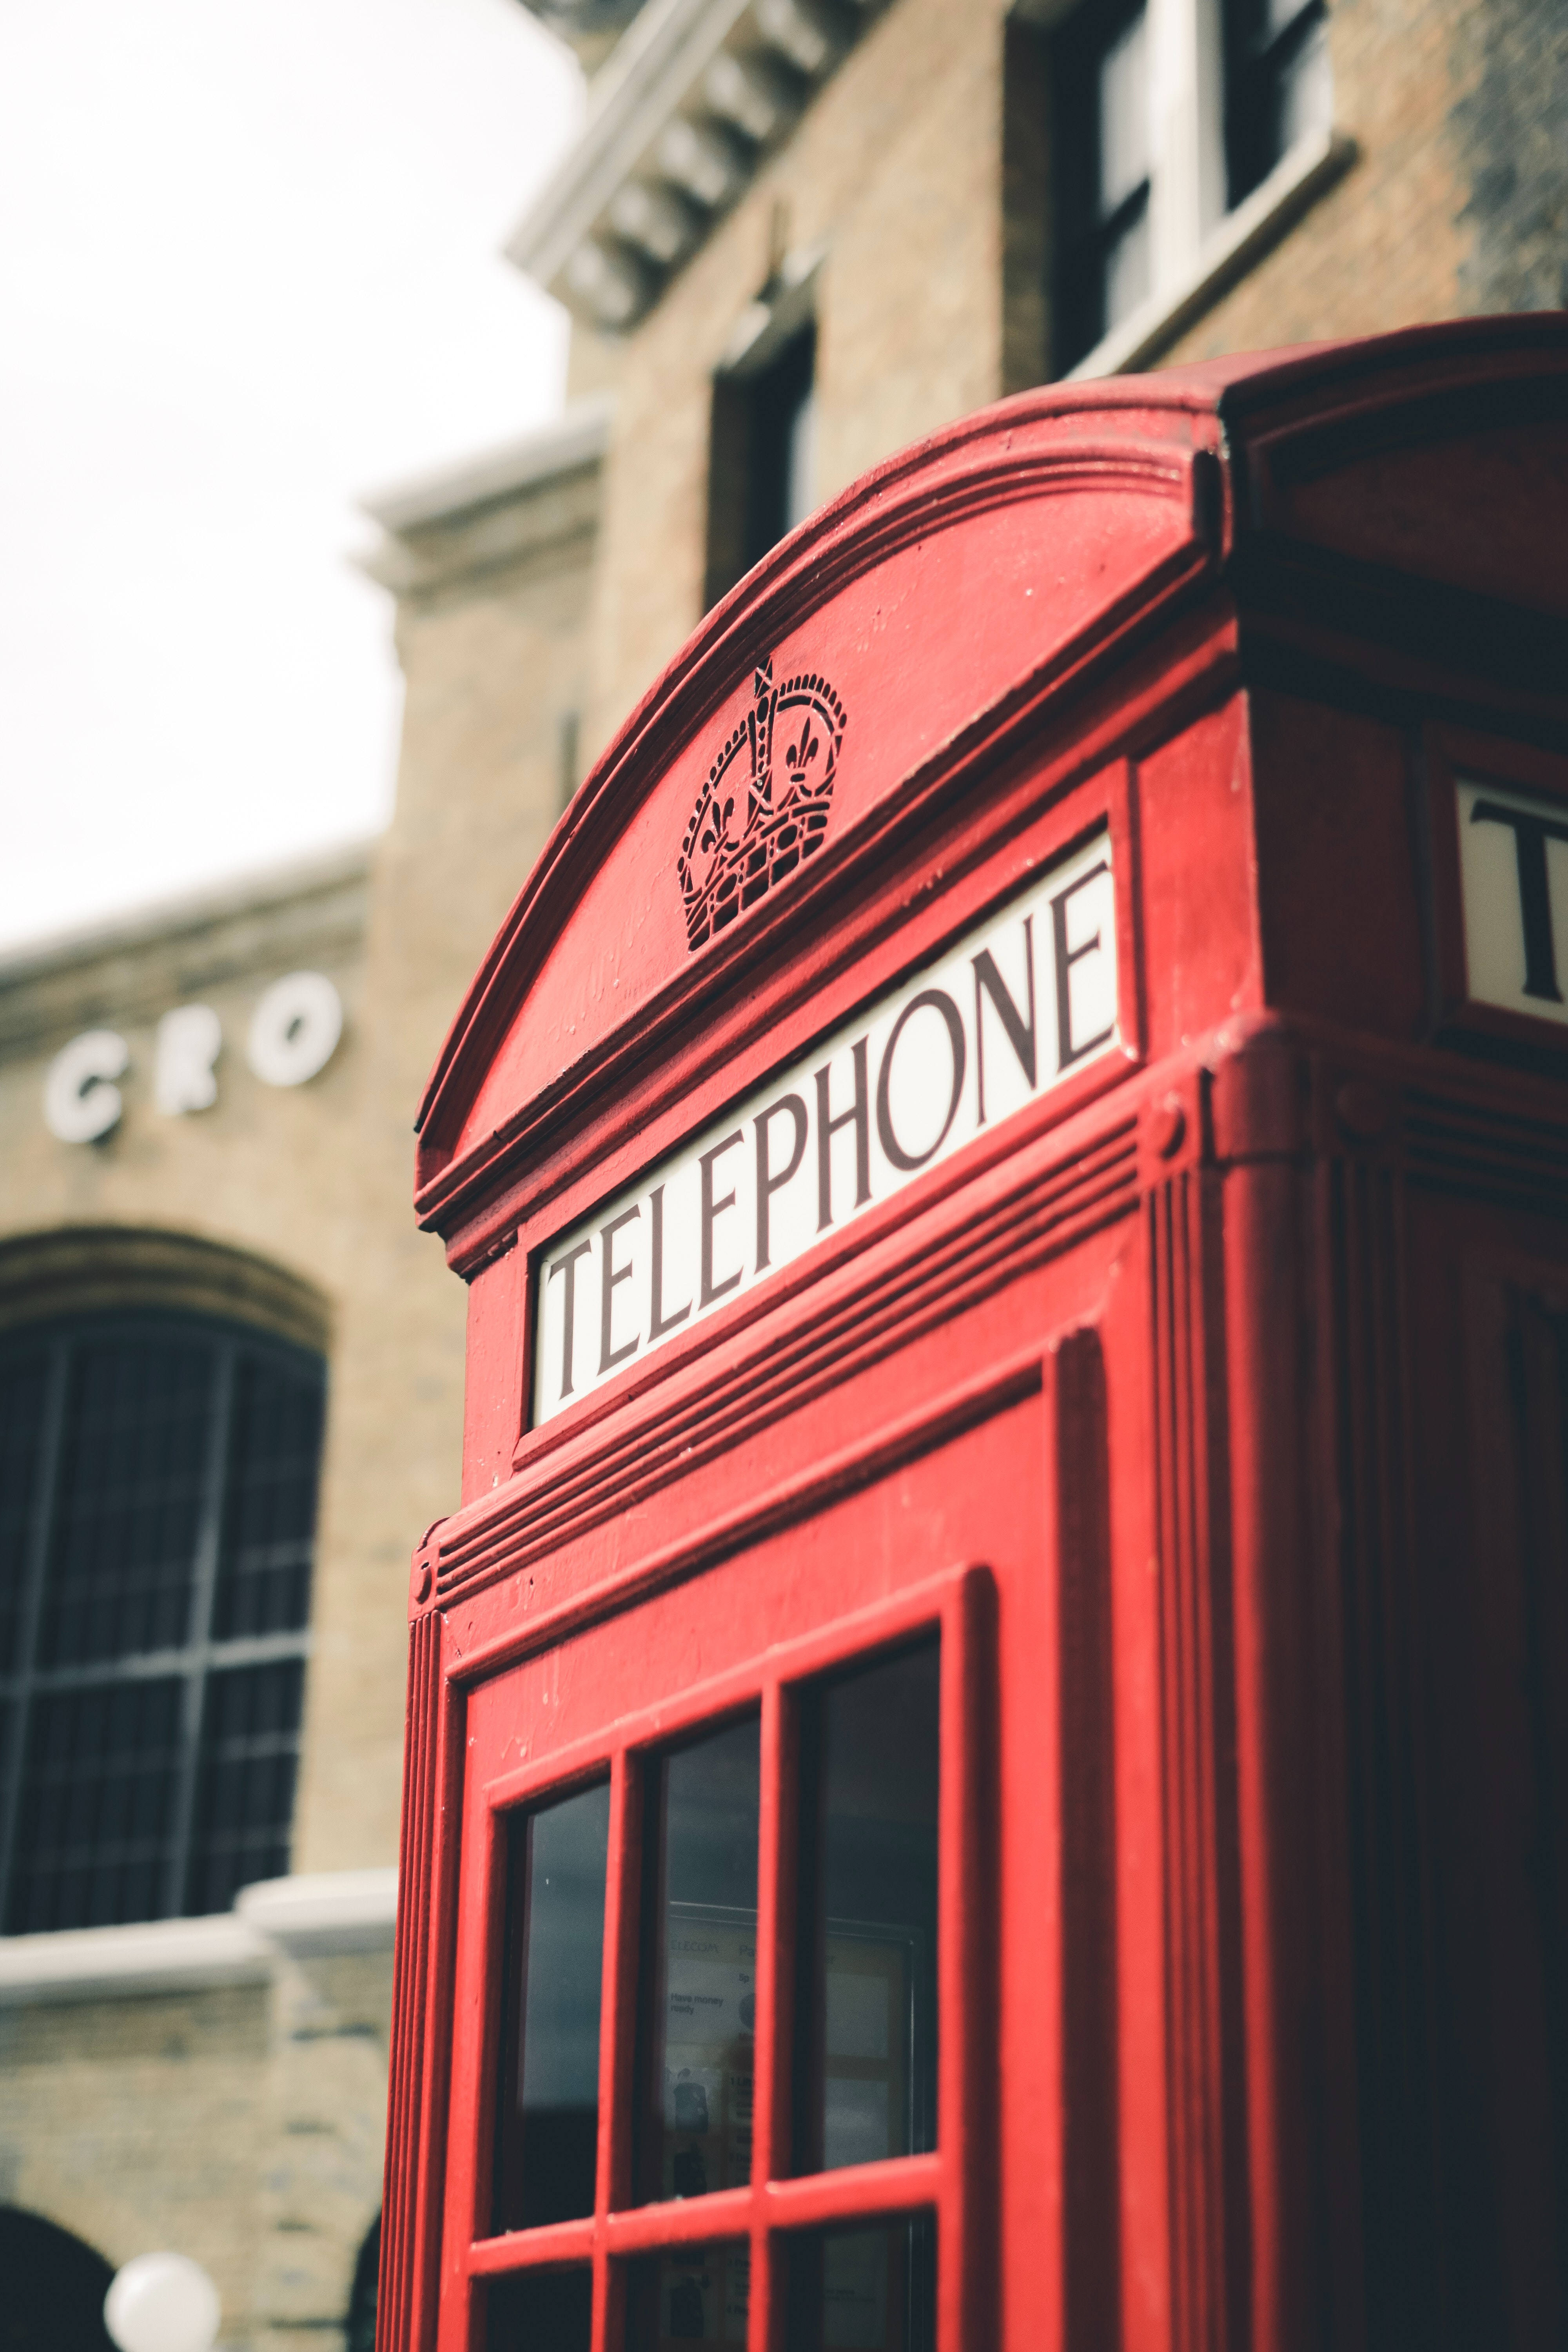 Telephone booth photos download the best free telephone booth stock photos hd images